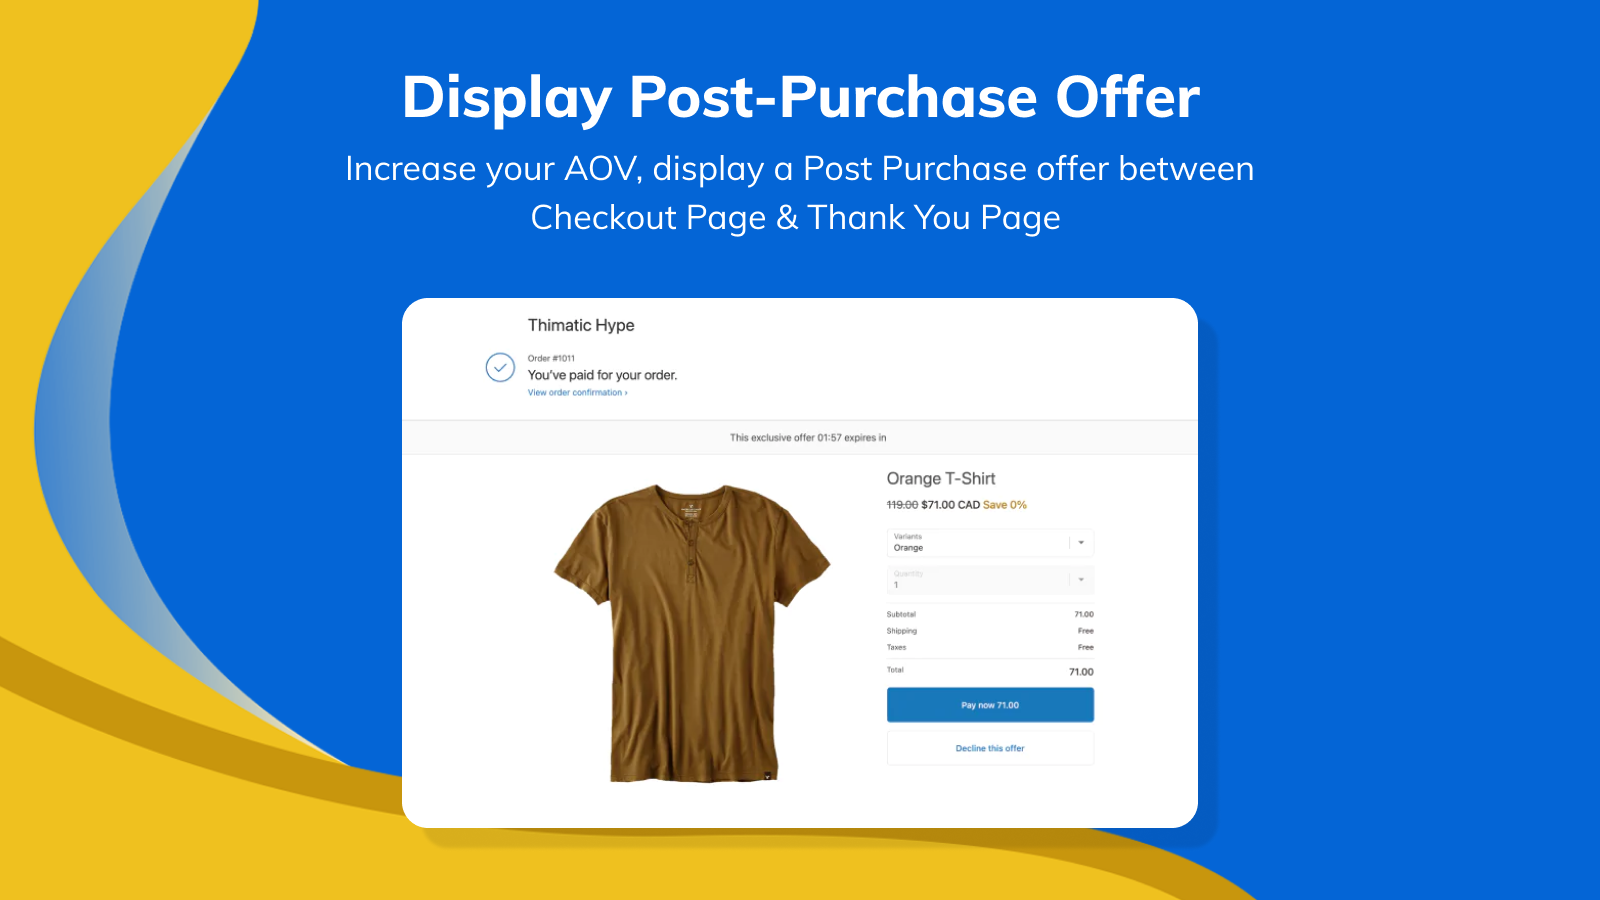 Display post-purchase offer between checkout & thank you page.